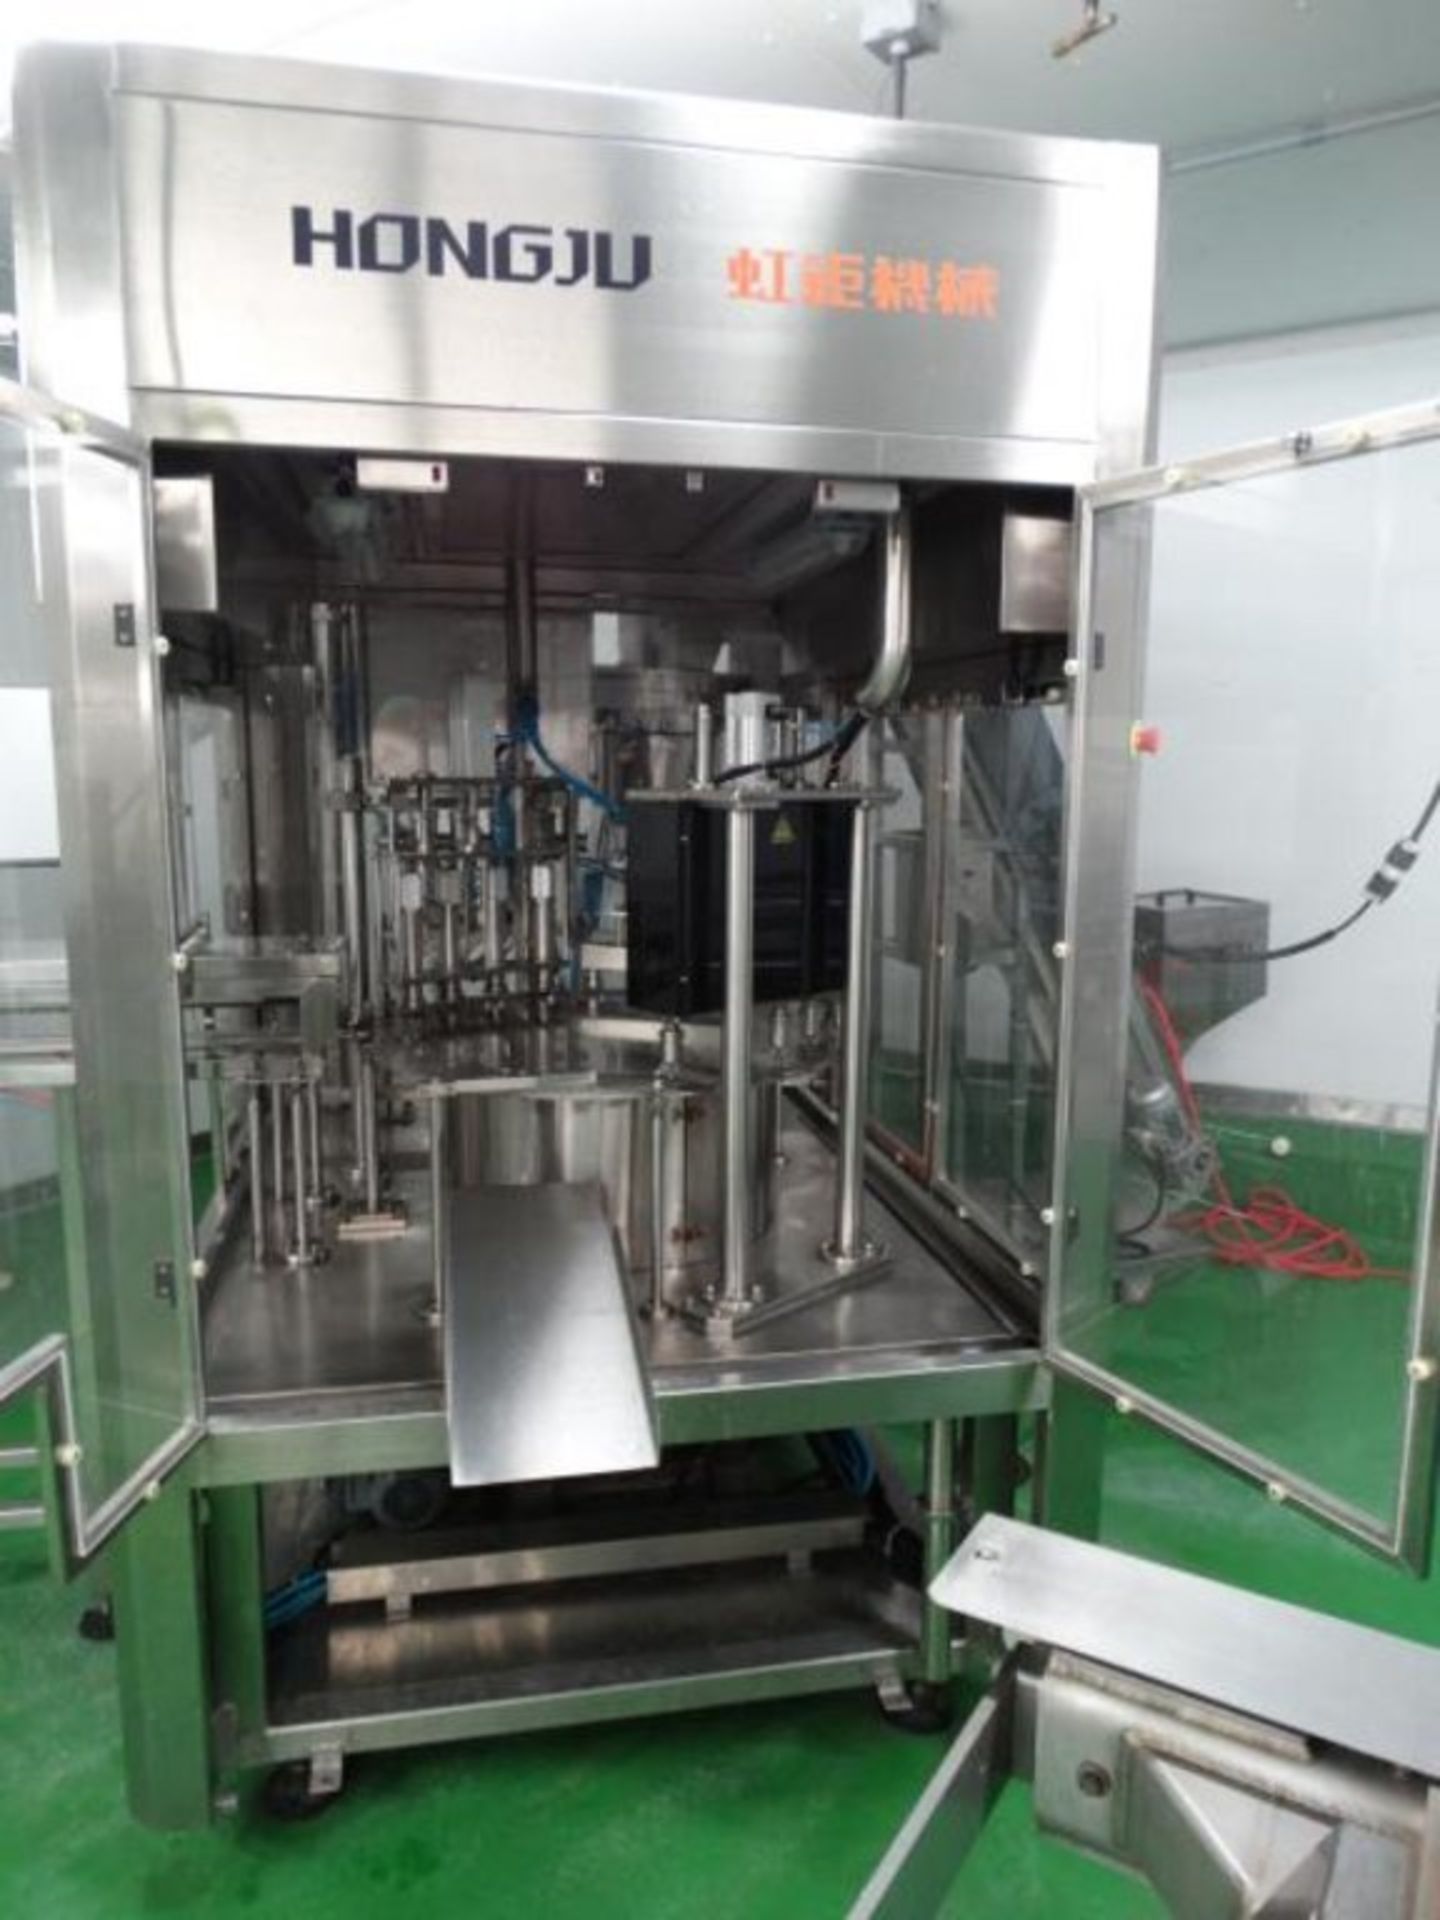 HongJU DGY 4A Filling and Cap Screwing Machine for cap Stand up Pouches - Image 35 of 48